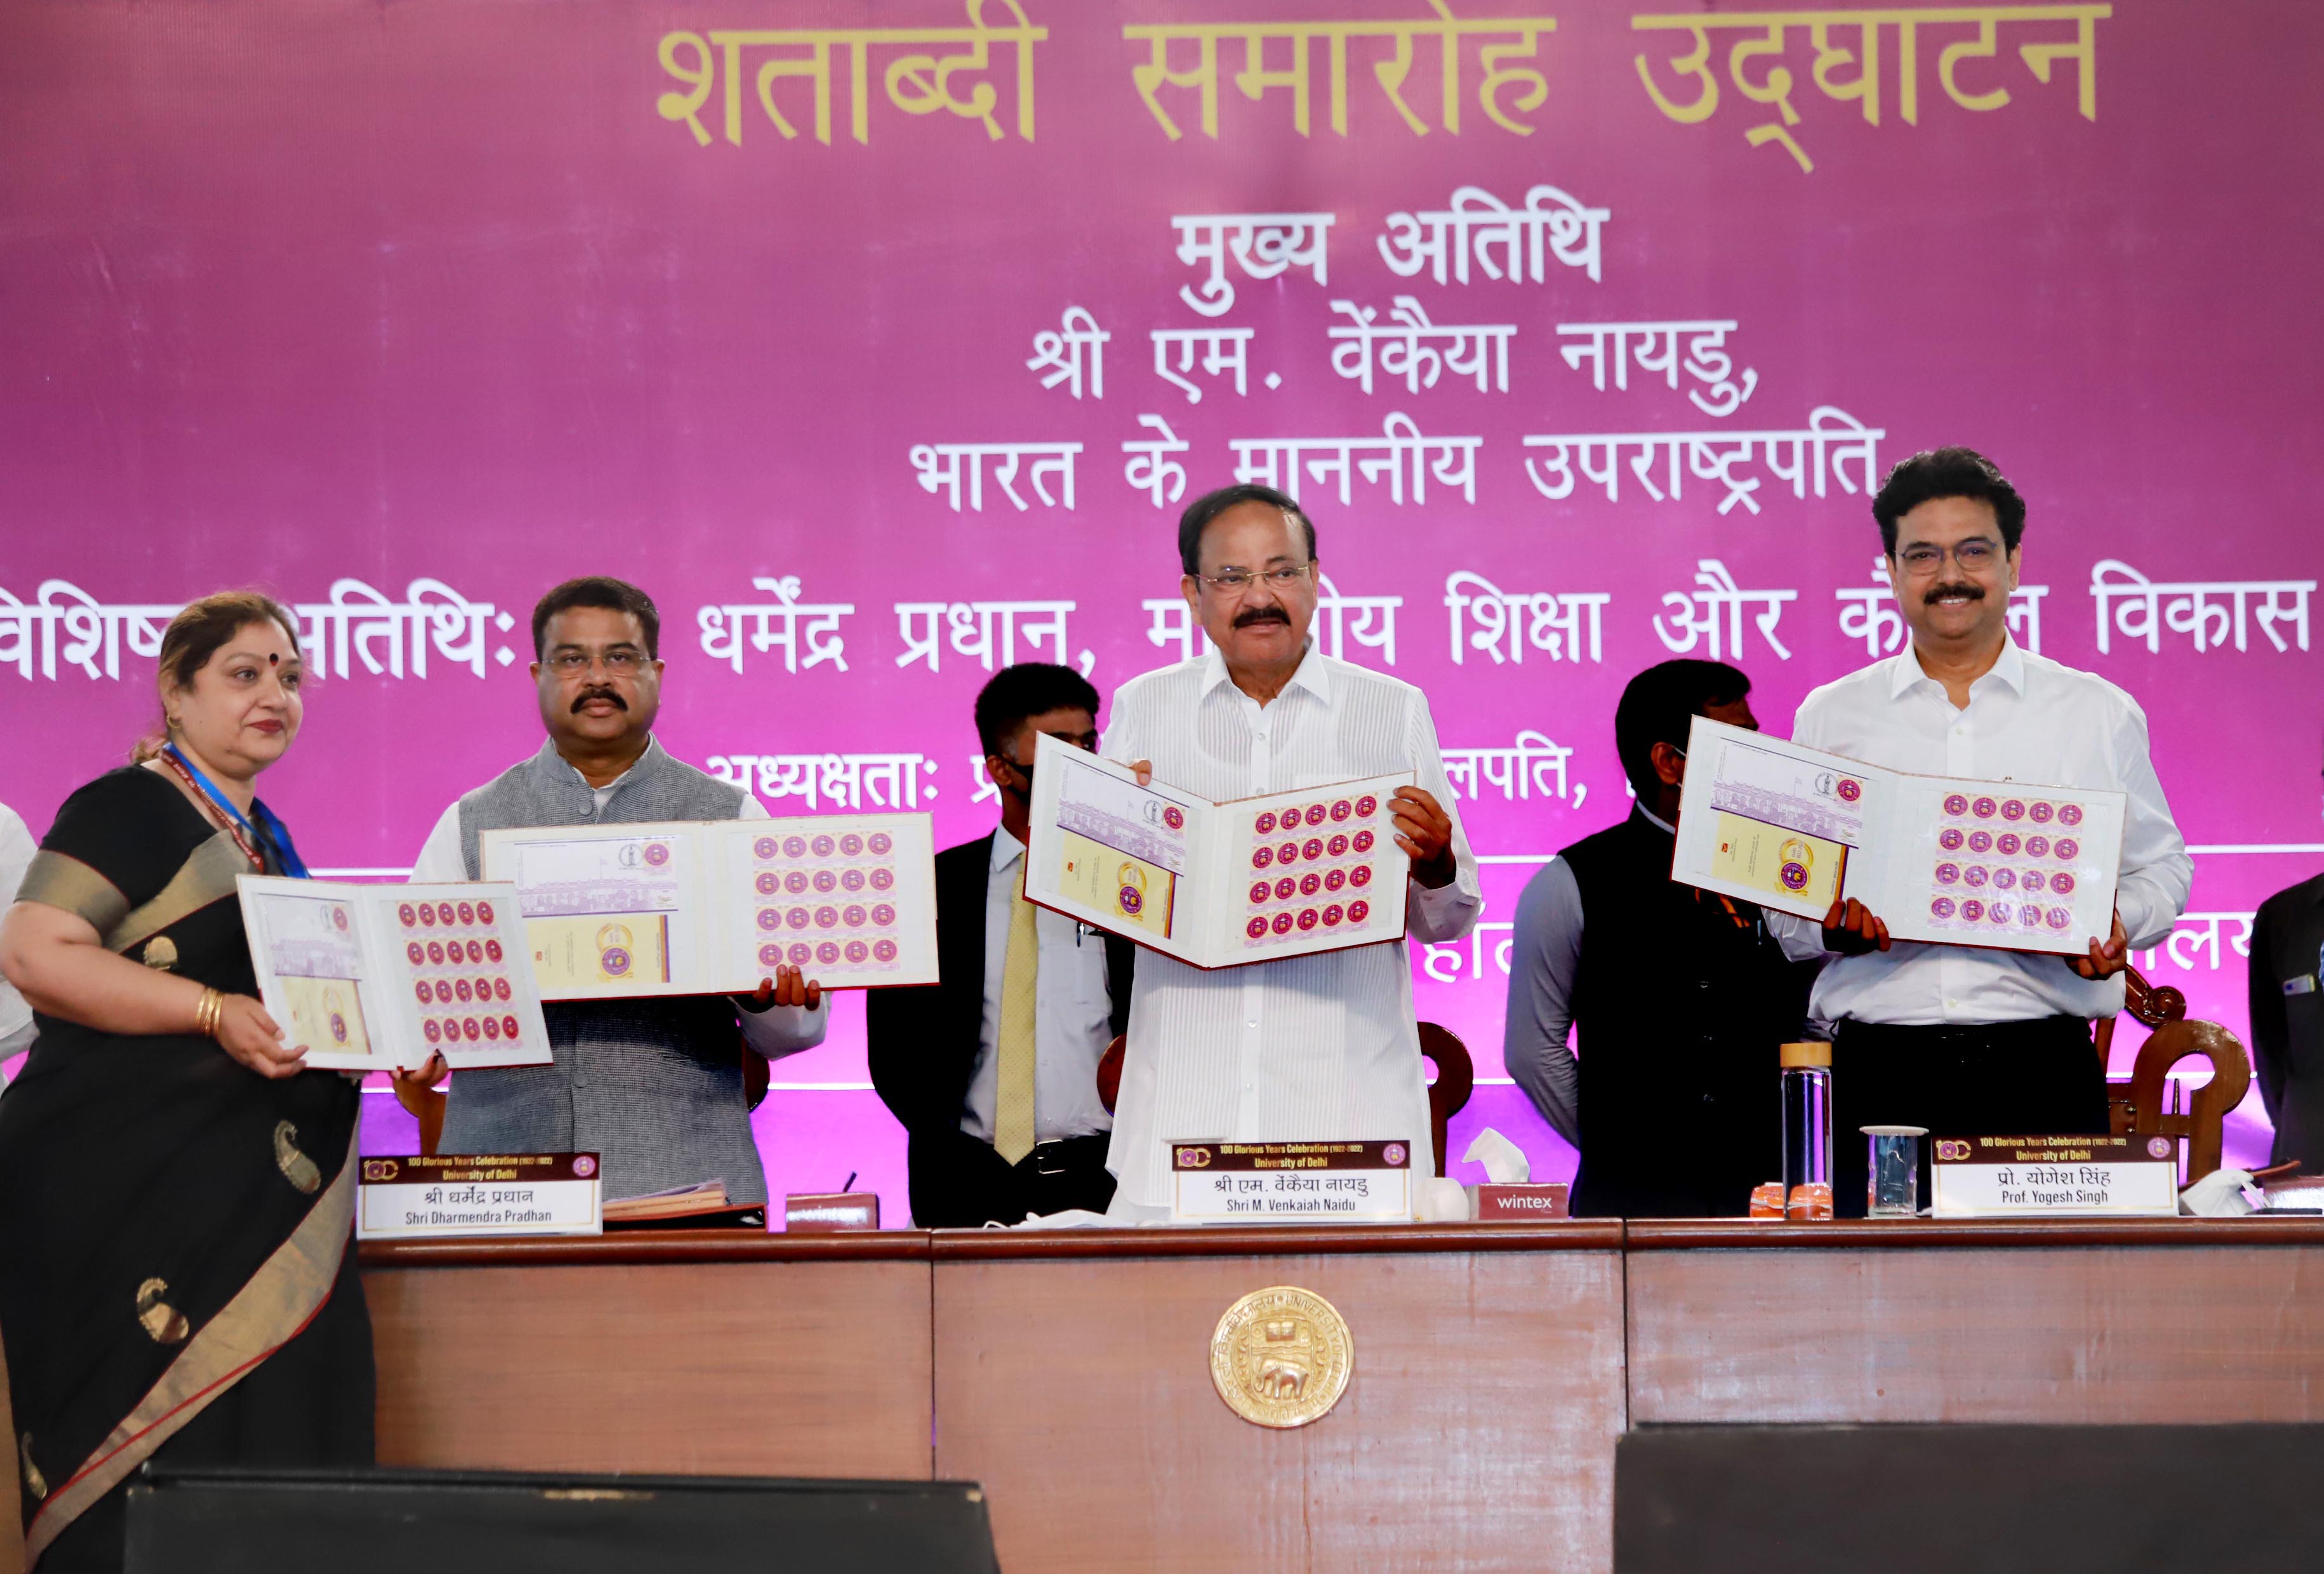 Vice President Venkaiah Naidu along with, Education Minister Dharmendra Pradhan and DU Vice Chancellor Prof. Yogesh Singh and others, During the centenary year celebrations of Delhi University